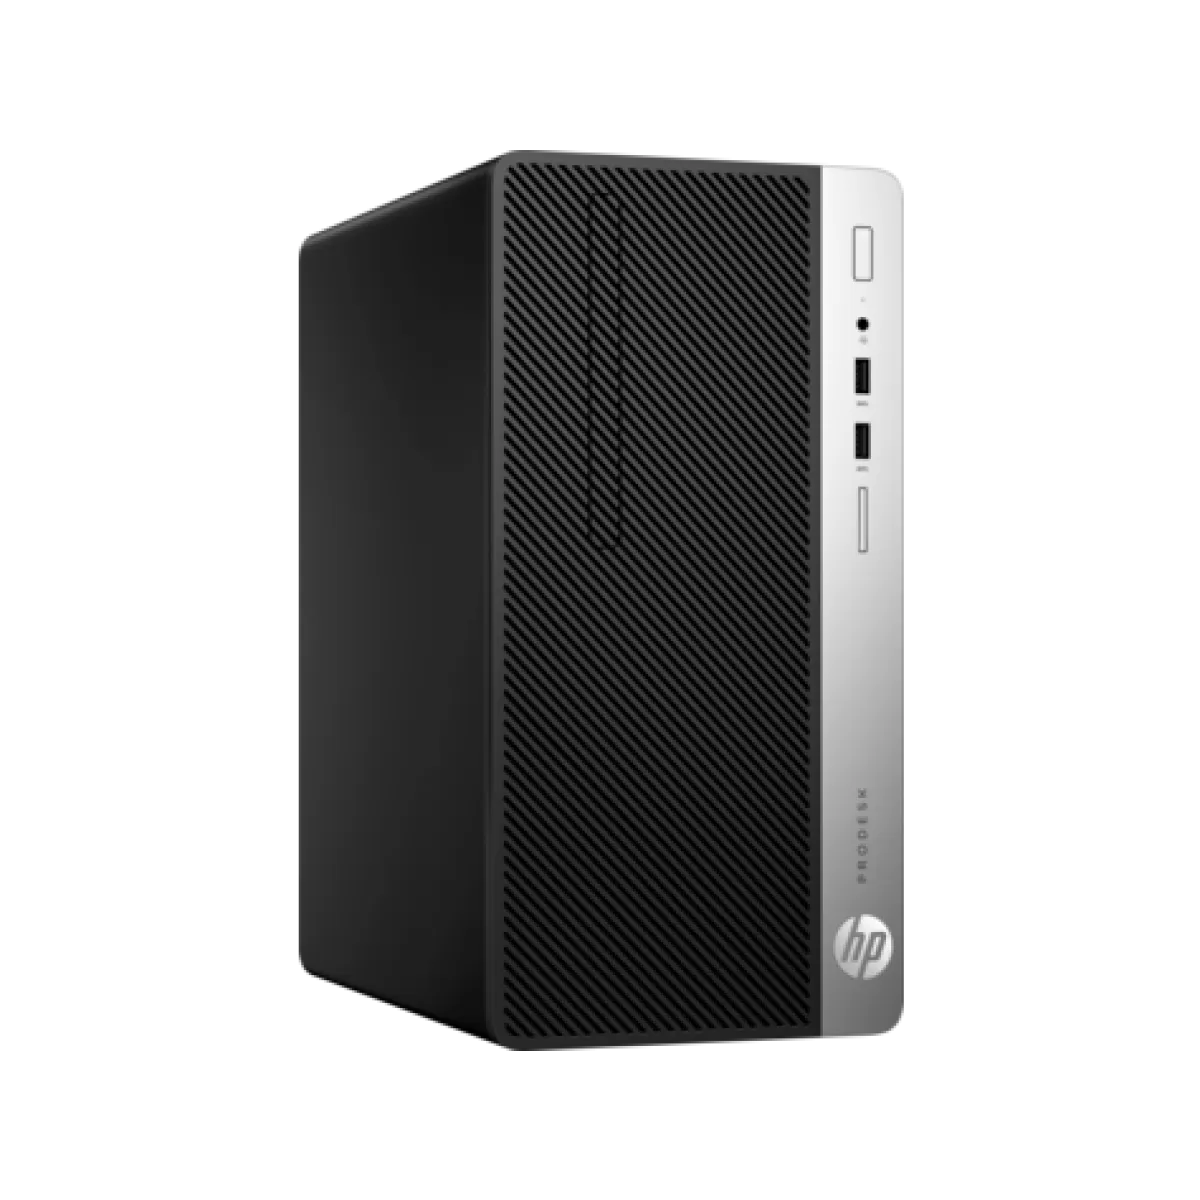 Компютър HP ProDesk 400G5 MT Intel Core i78700 with Intel UHD Graphics 630 (3.2 GHz base frequency, up to 4.6 GHz with Intel Turbo Boost Technology, 12 MB cache, 6 cores) 16 GB DDR42666 SDRAM (2 X 8 GB) 512 GB PCIe NVMe SSD DVD/RW Windows 10 Pro,1 Year wa